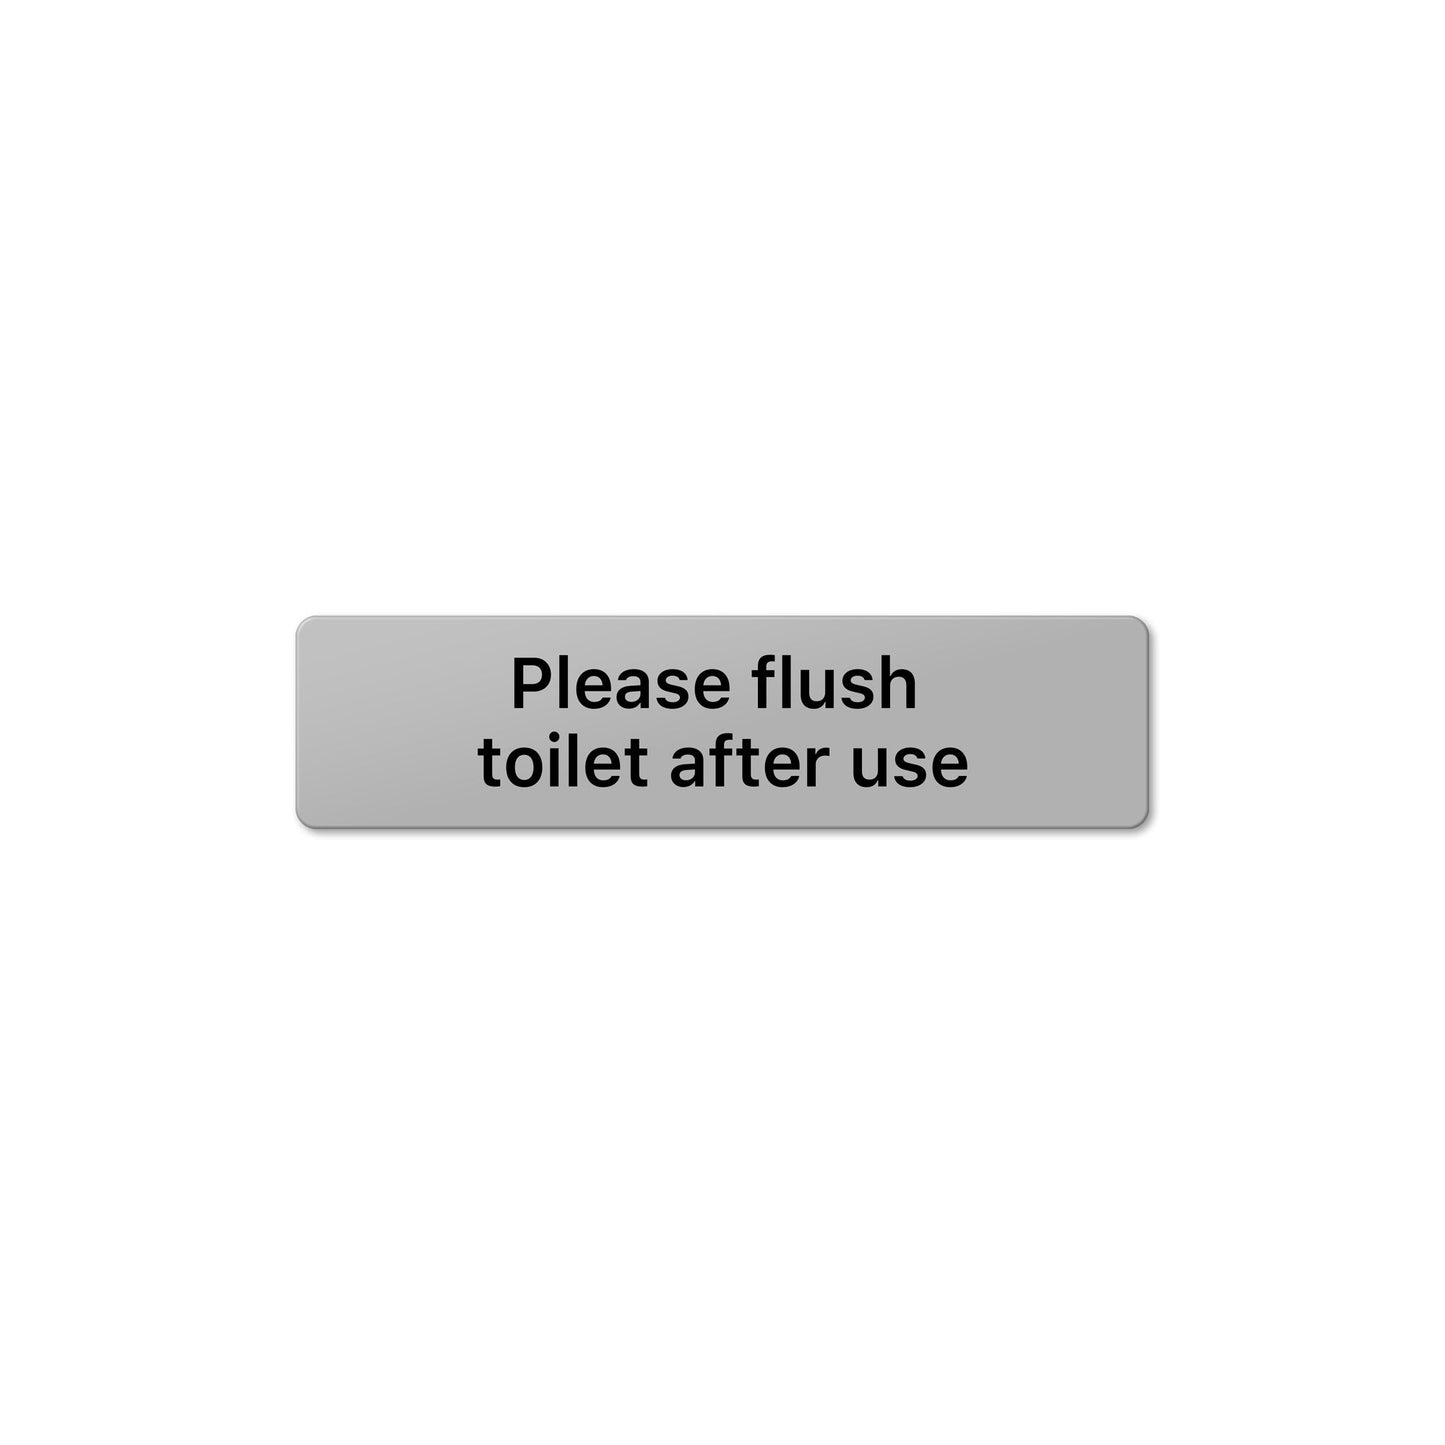 Please flush toilet after use